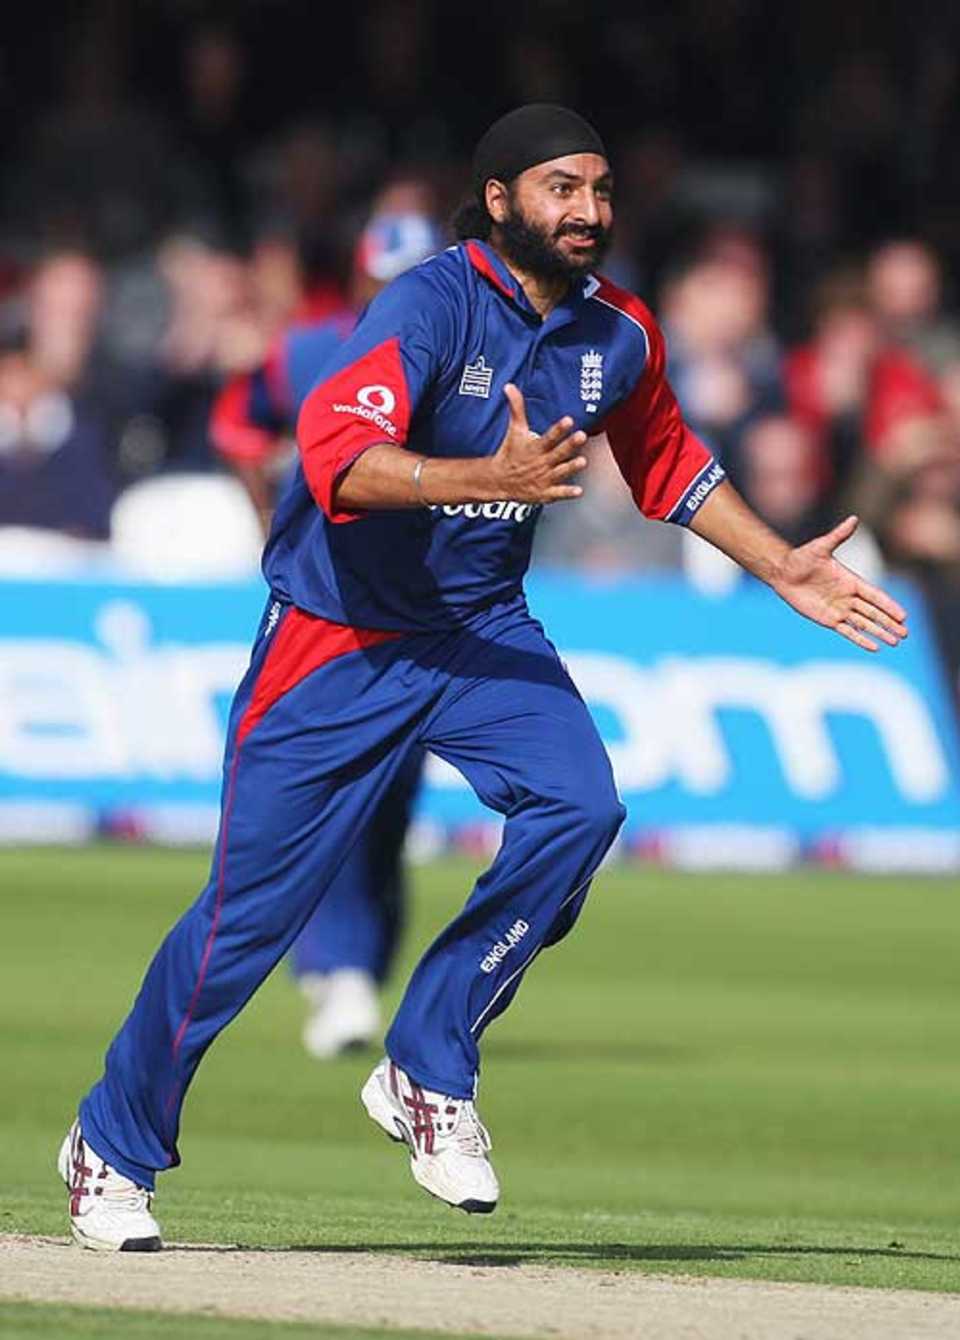 Monty Panesar celebrates the dismissal of Daren Powell, England v West Indies, 1st ODI, Lord's, July 1, 2007